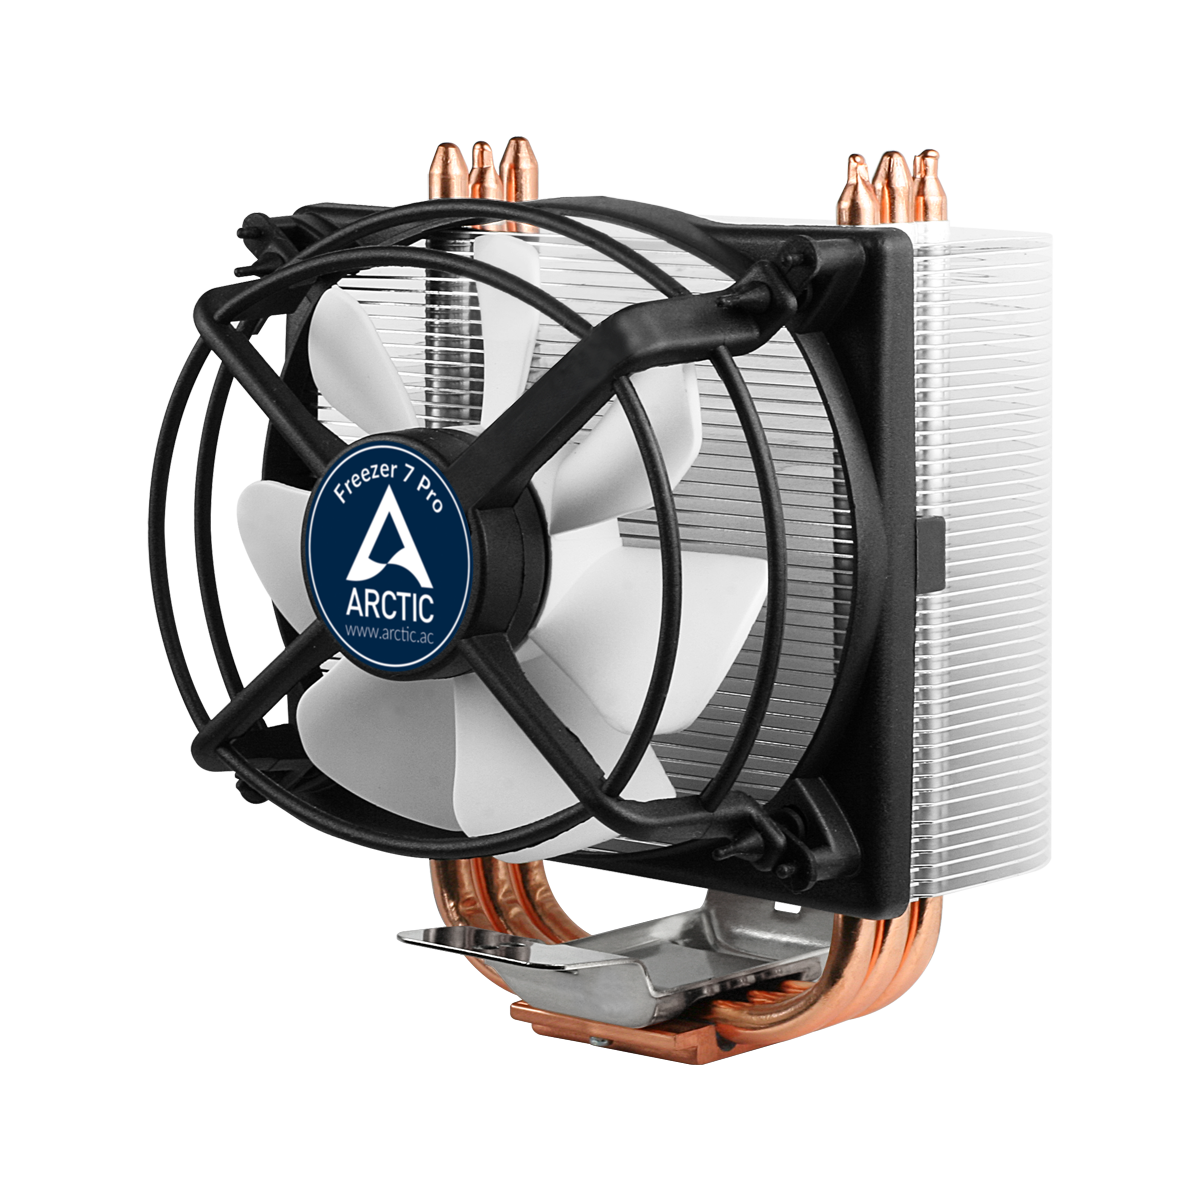 Clan Do my best eleven Freezer 7 Pro | Compact Multi-Compatible CPU Cooler | ARCTIC